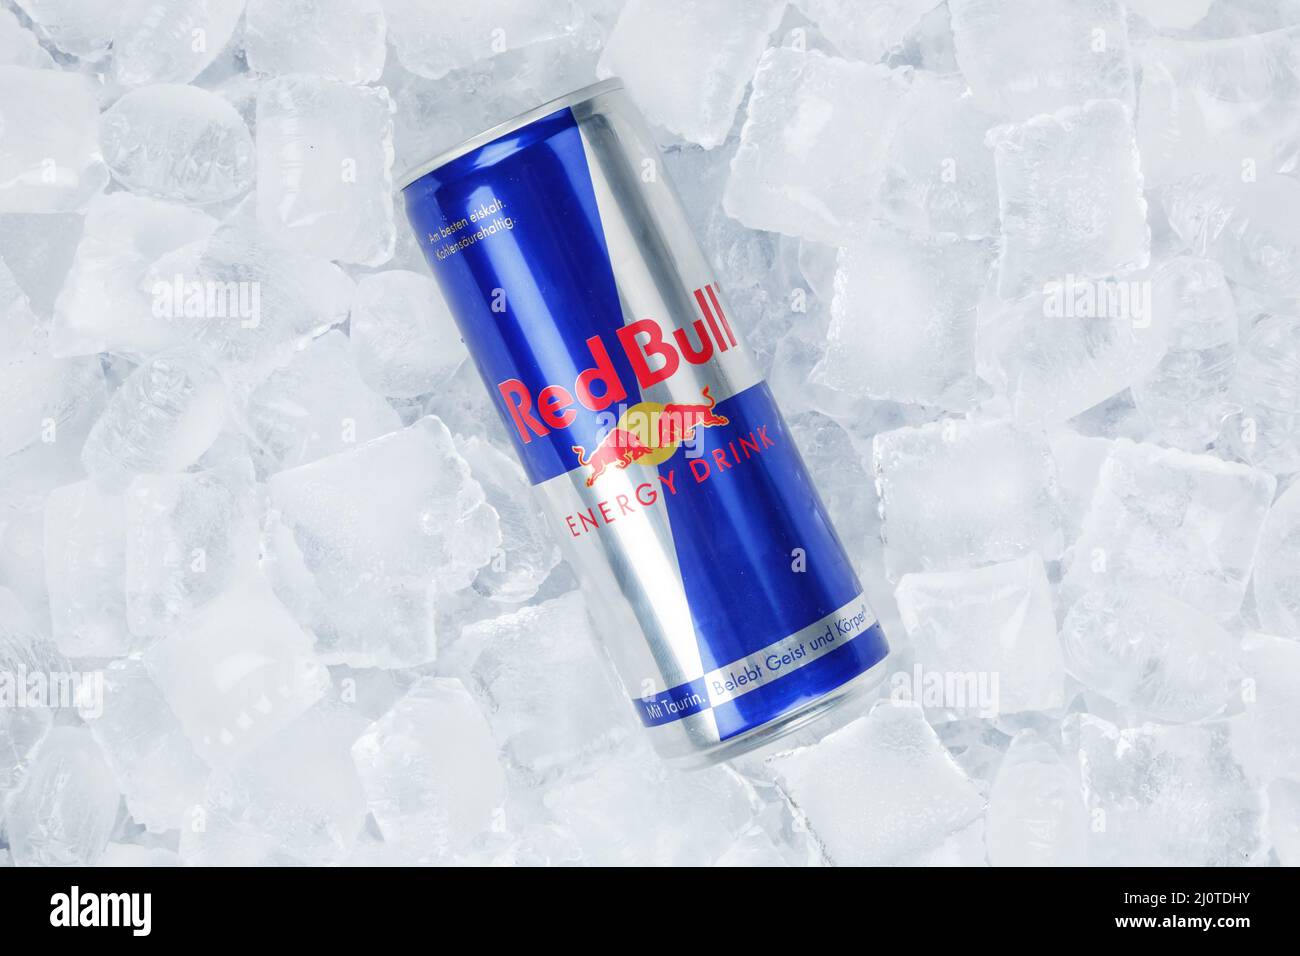 Red Bull Energy Drink Lemonade Soft Drink Drink In Can On Ice Ice Cube Stock Photo